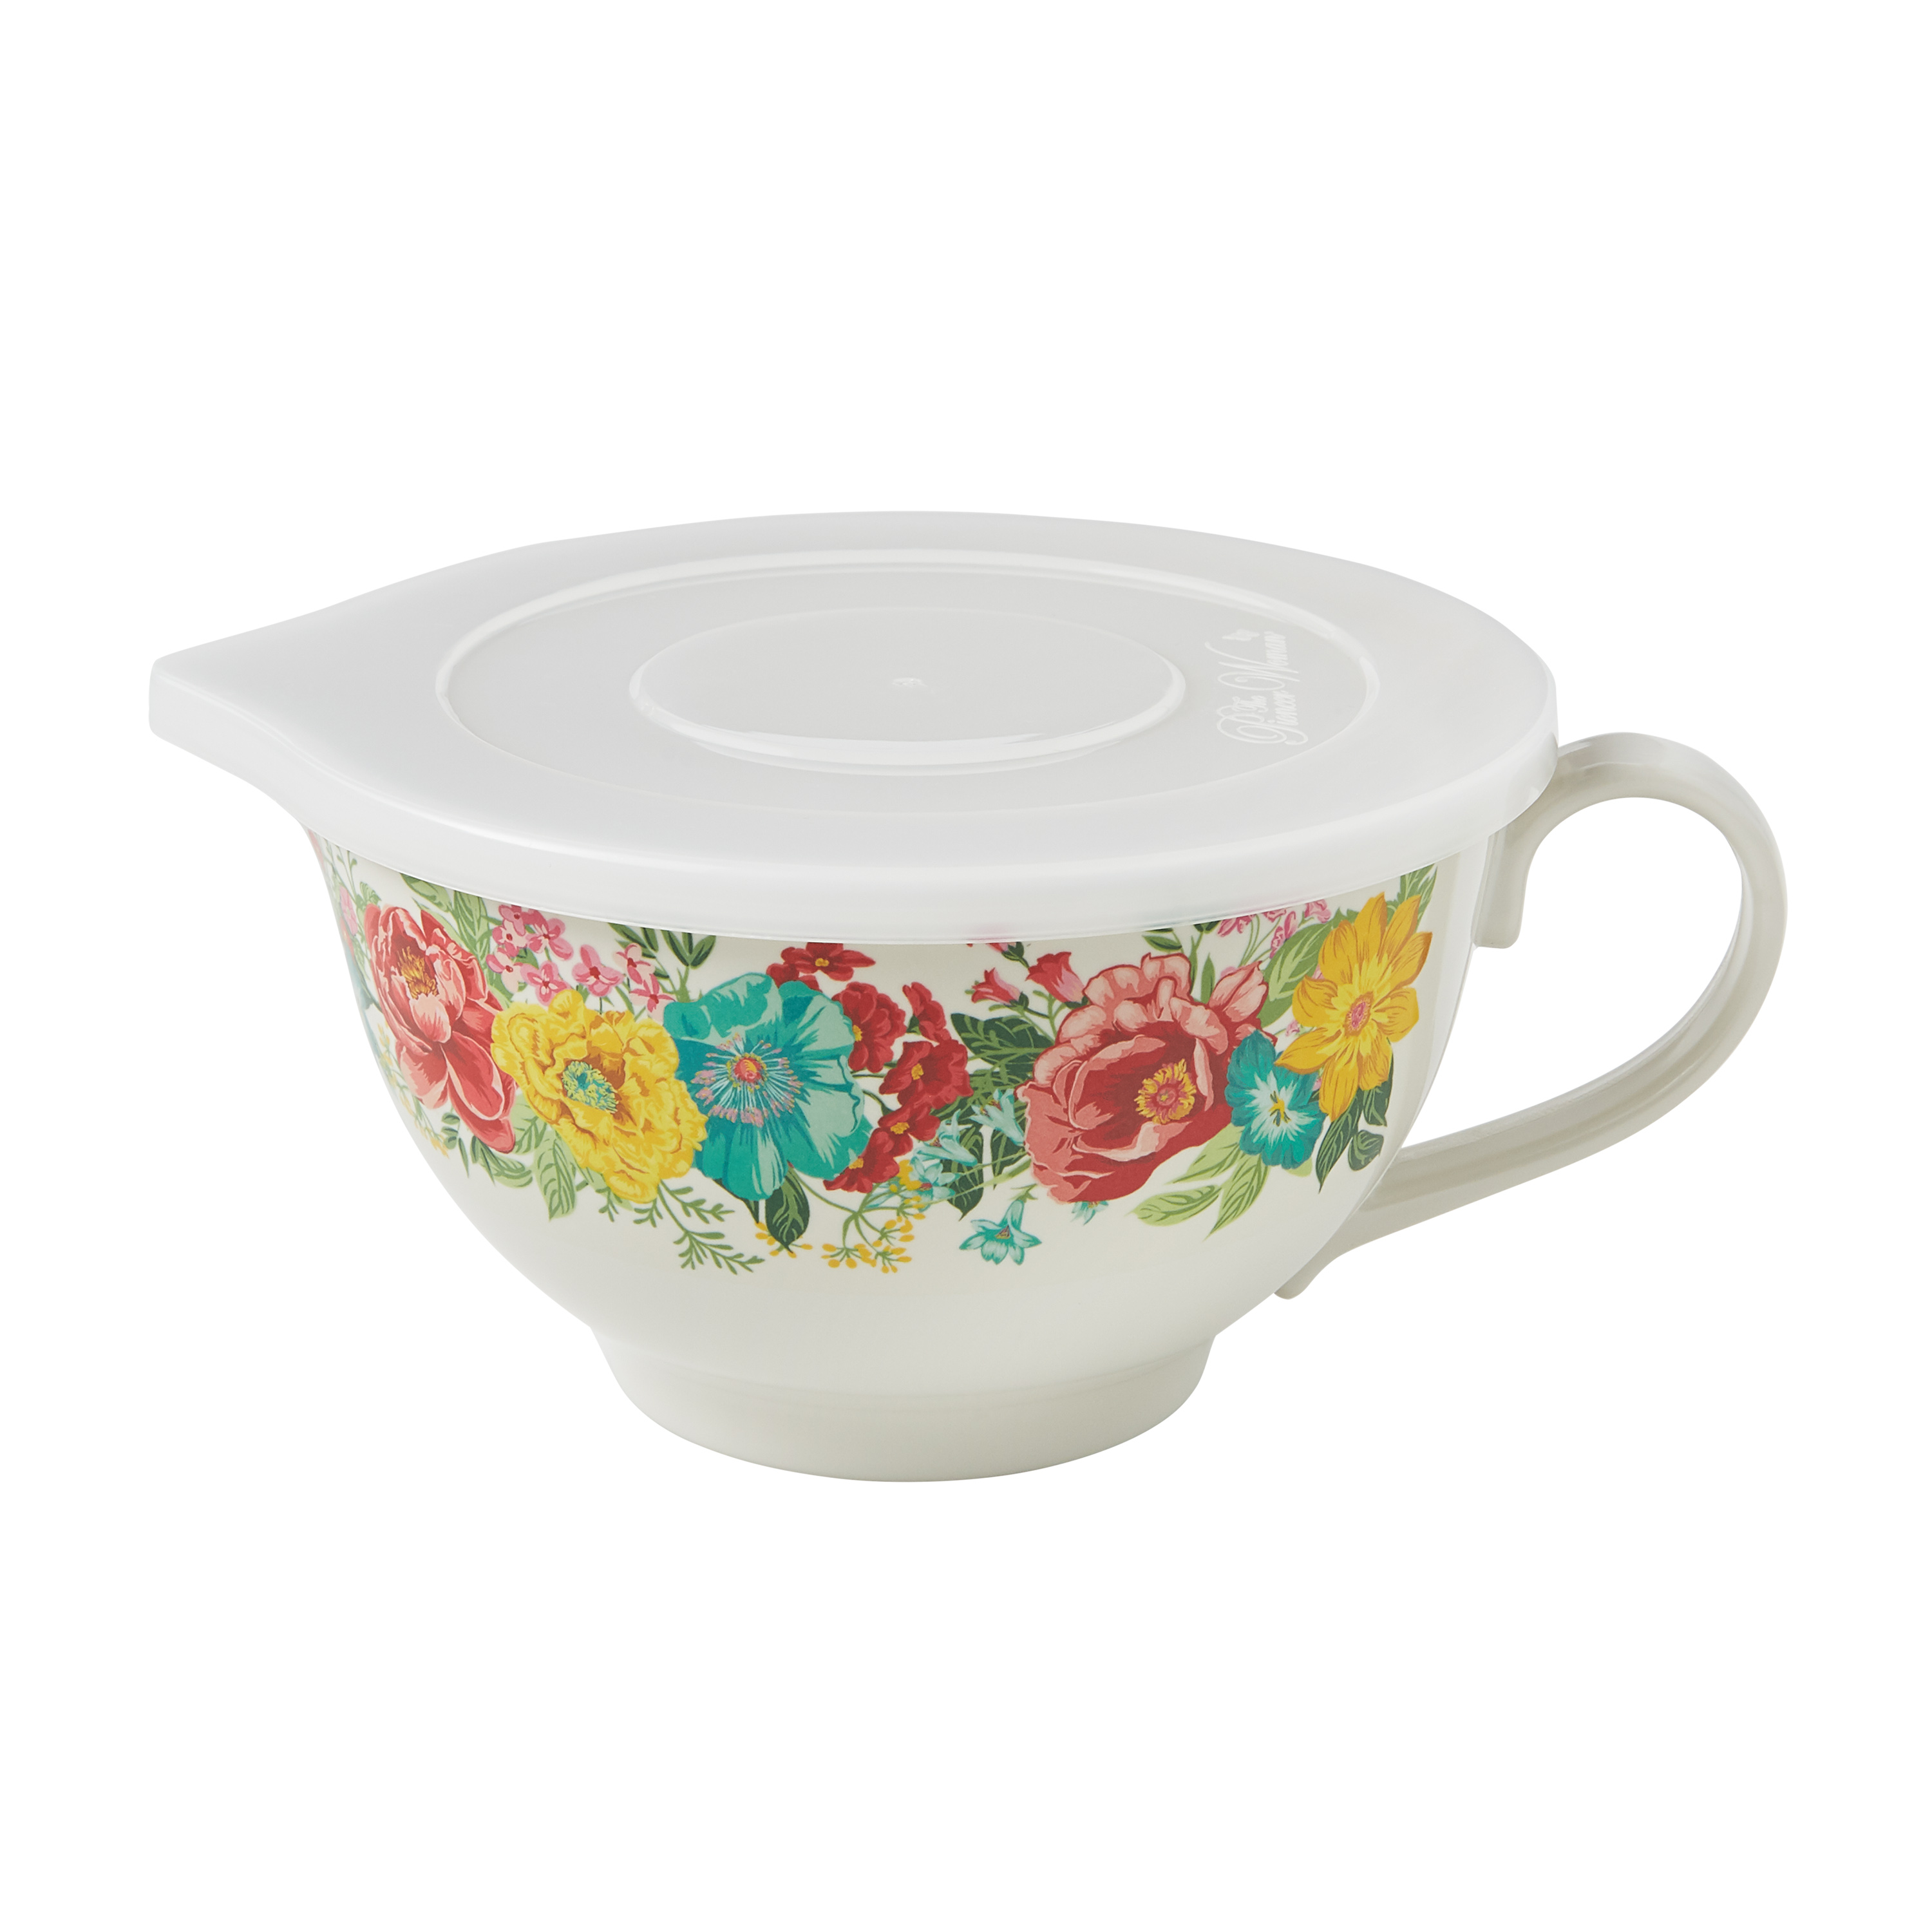 The Pioneer Woman Fancy Flourish 20-Piece Bake & Prep Set with Baking Dish & Measuring Cups - image 5 of 8